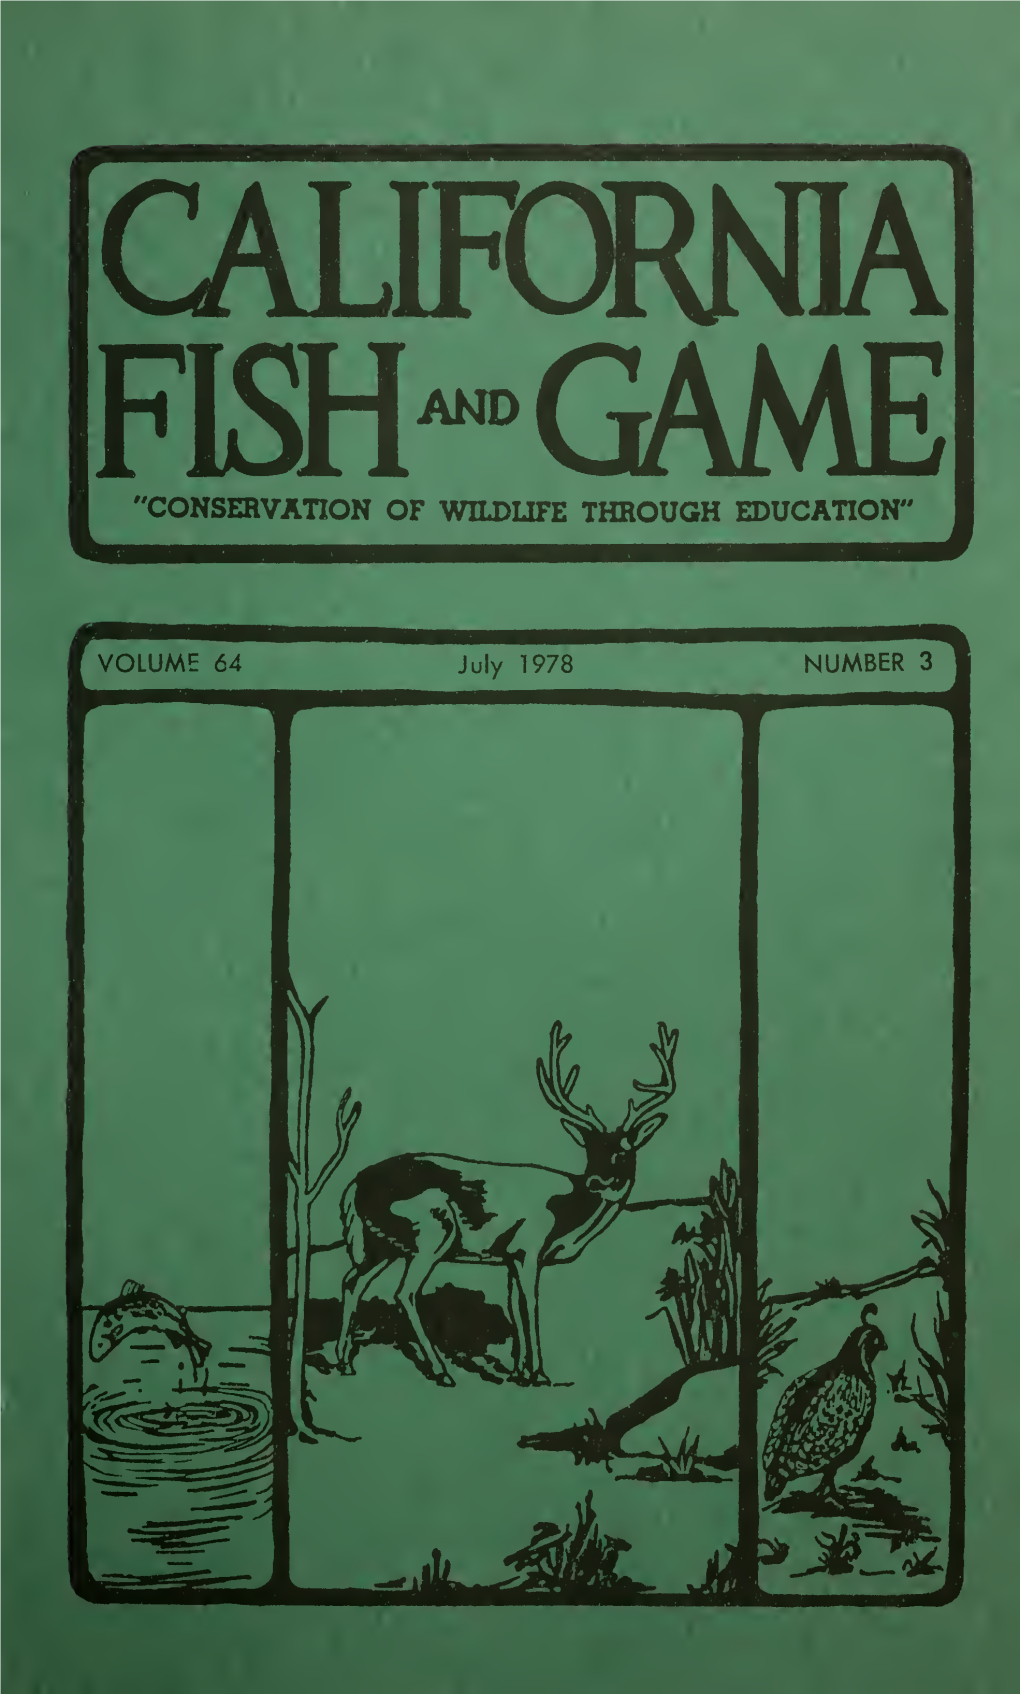 FISH™GAME "CONSERVATION of WILDLIFE THROUGH EDUCATION" California Fish and Game Is a Journal Devoted to the Conservation of Wild- Life